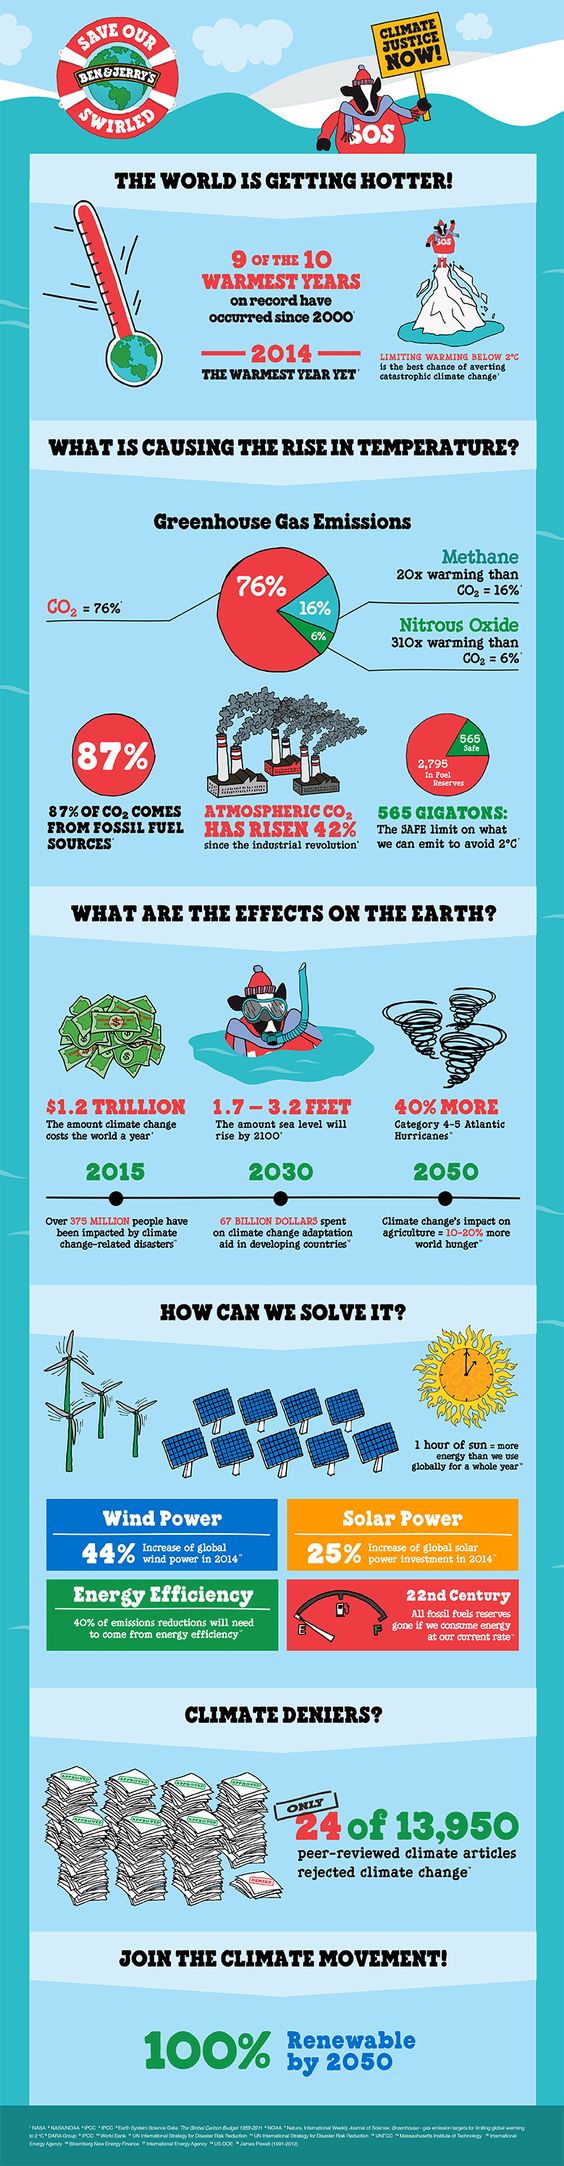 an infographic about the world getting hotter